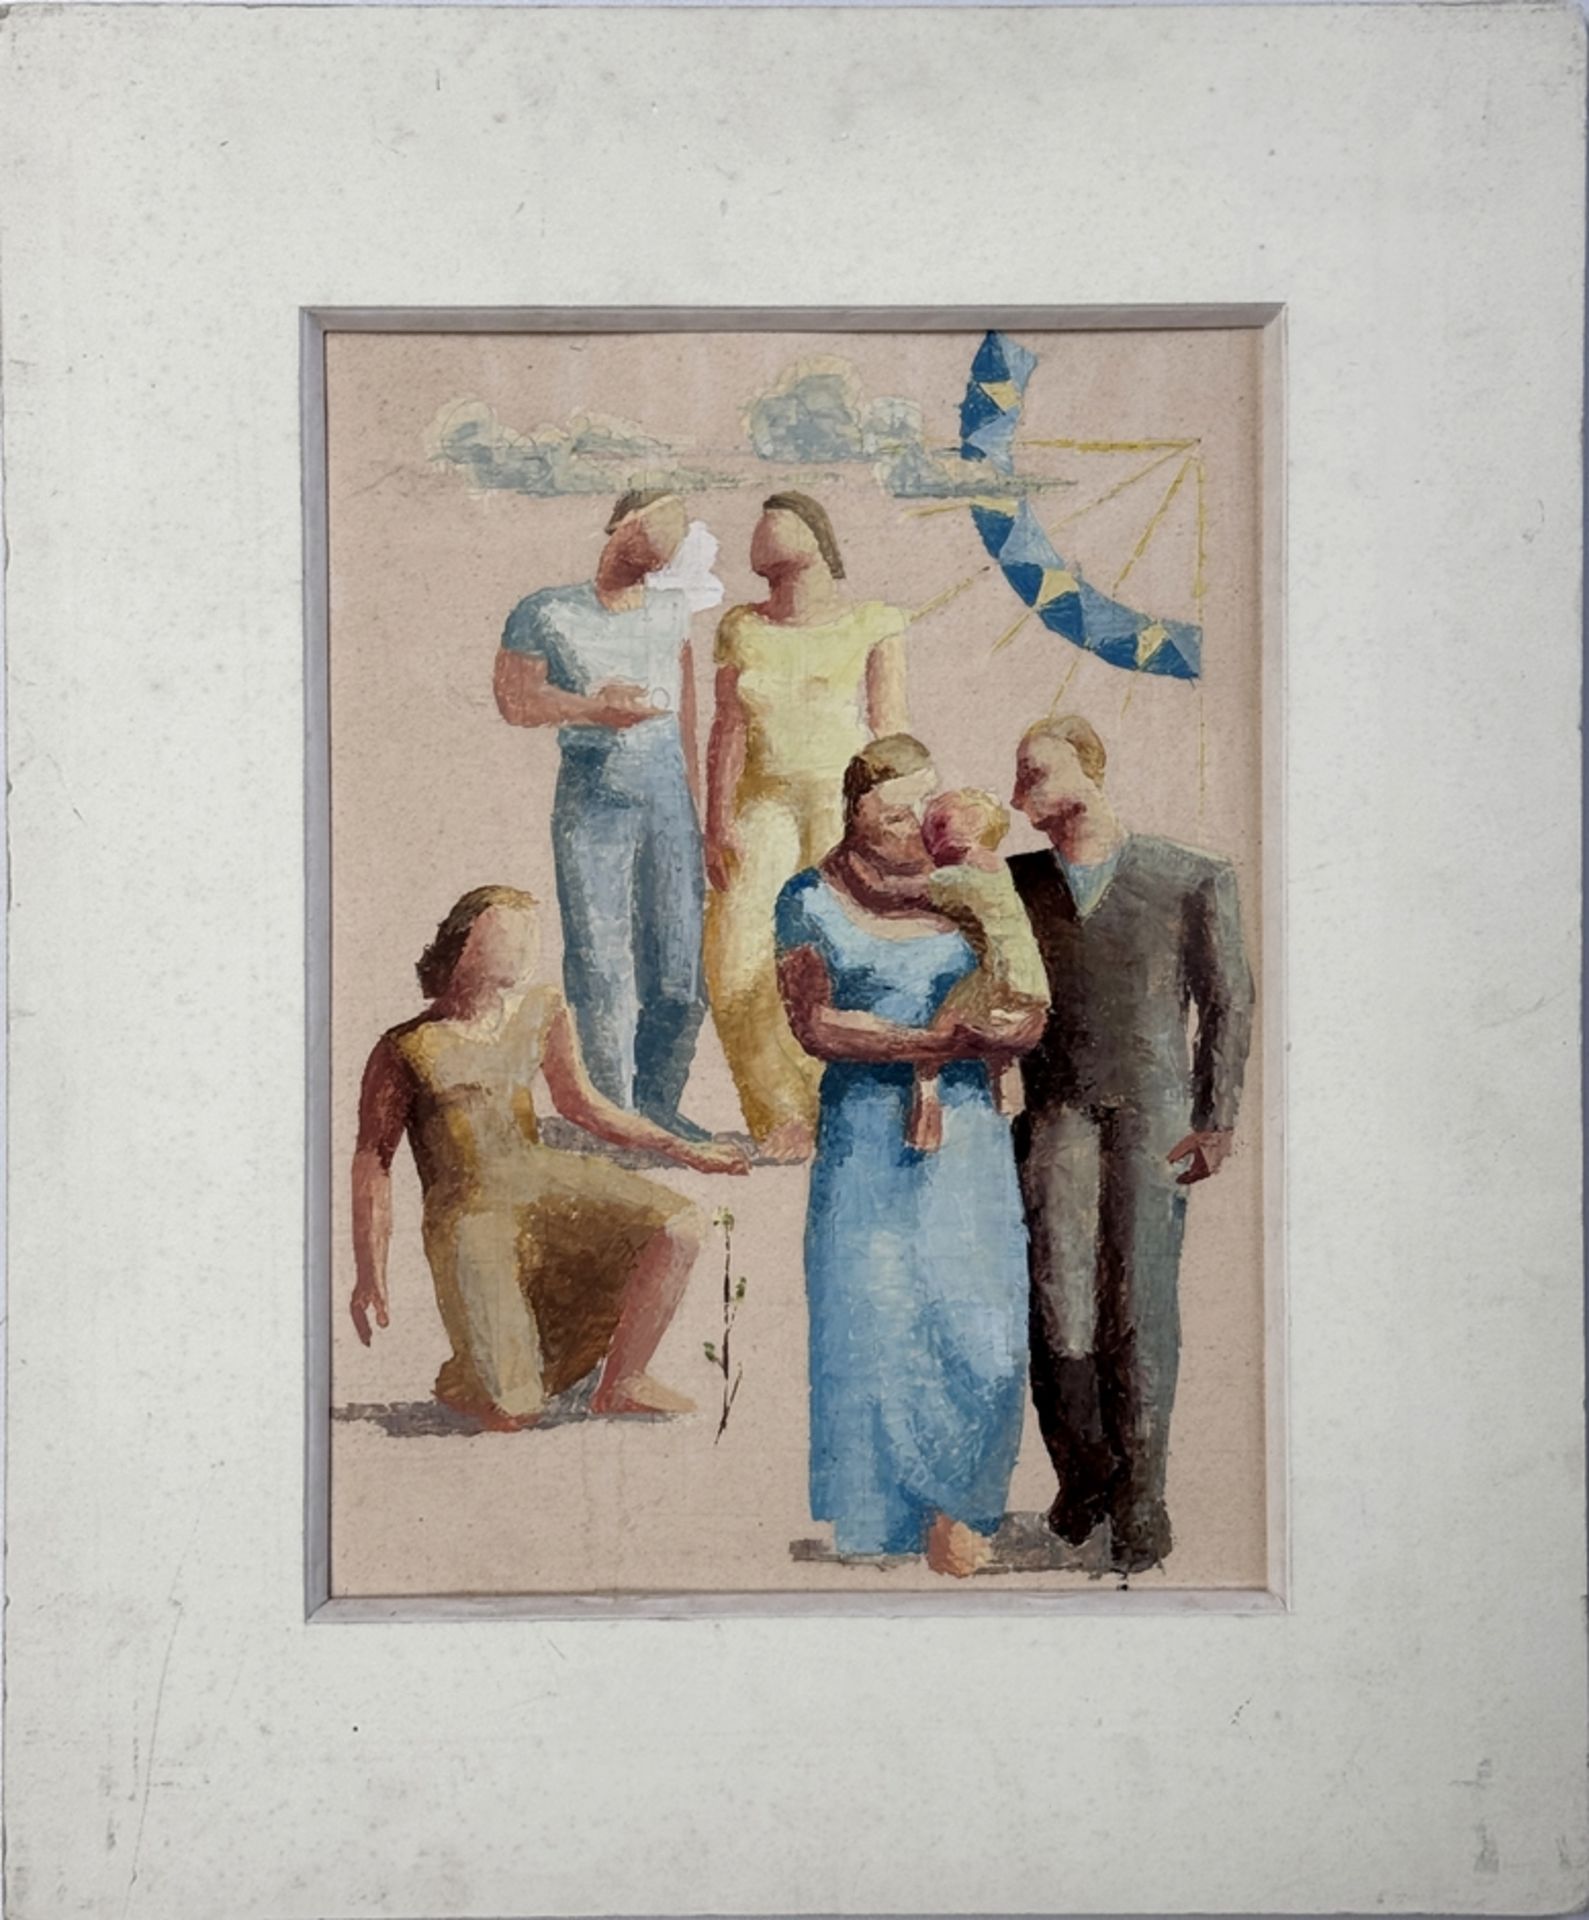 Frey, Hans Conrad (1877 Wald - 1935 Kilchberg) attributed to, "Studies" with people, oil on paper b - Image 2 of 3